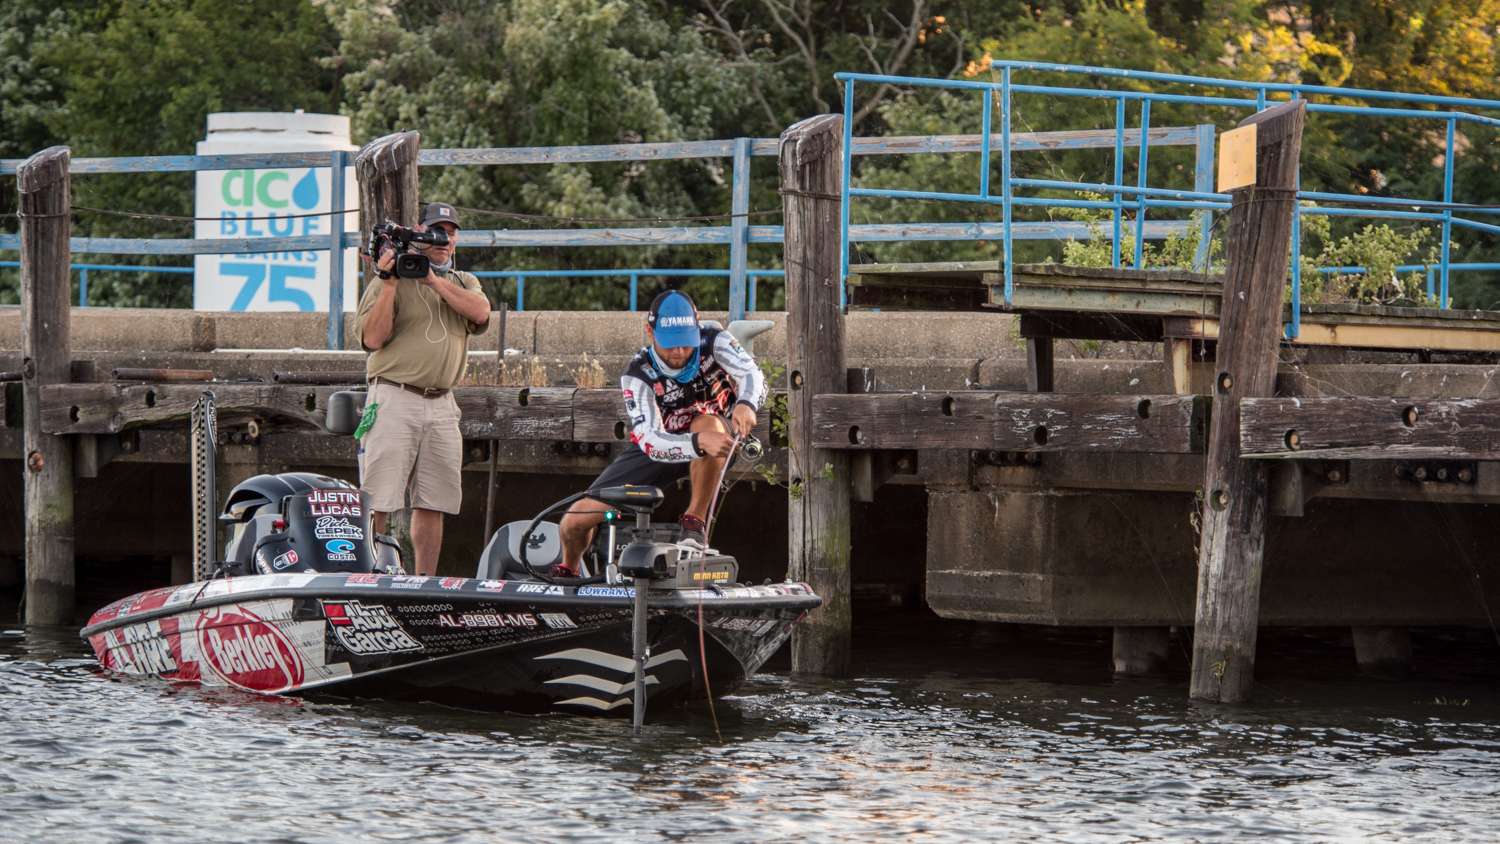 Wire to wire leader Justin Lucas started Day 4 with around a 6-pound lead over the rest of the Top 12 anglers. 